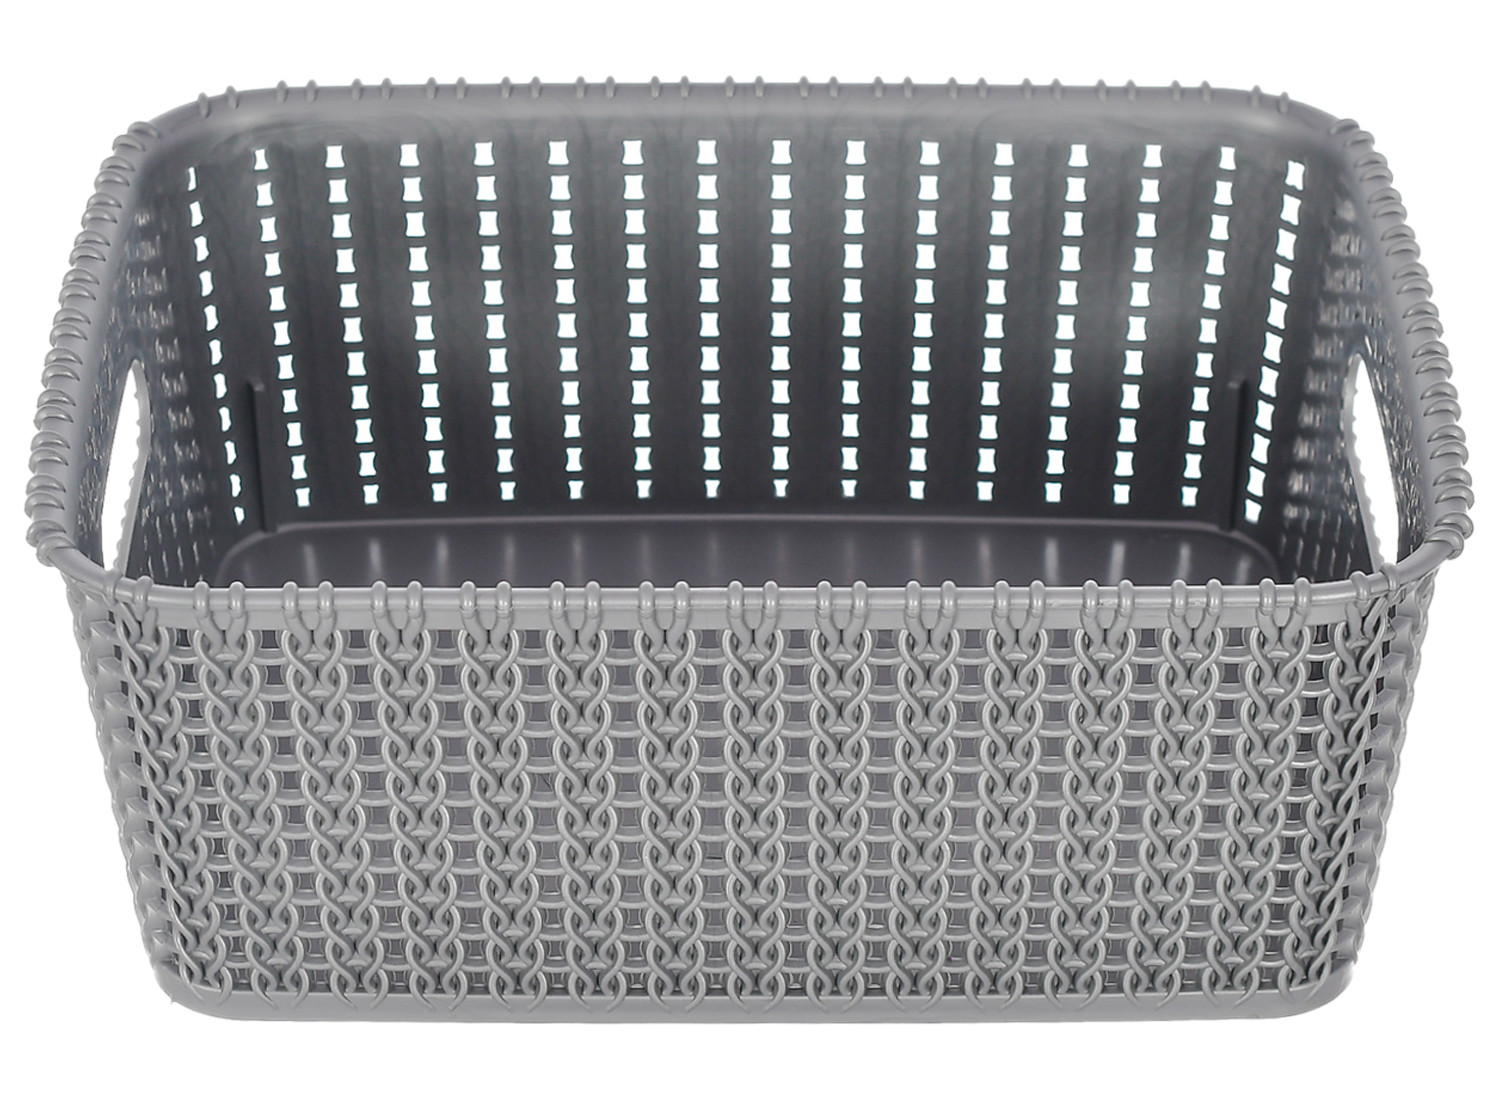 Kuber Industries Multiuses Large M 20 Plastic Tray/Basket/Organizer Without Lid-(Grey & Brown) -46KM0101